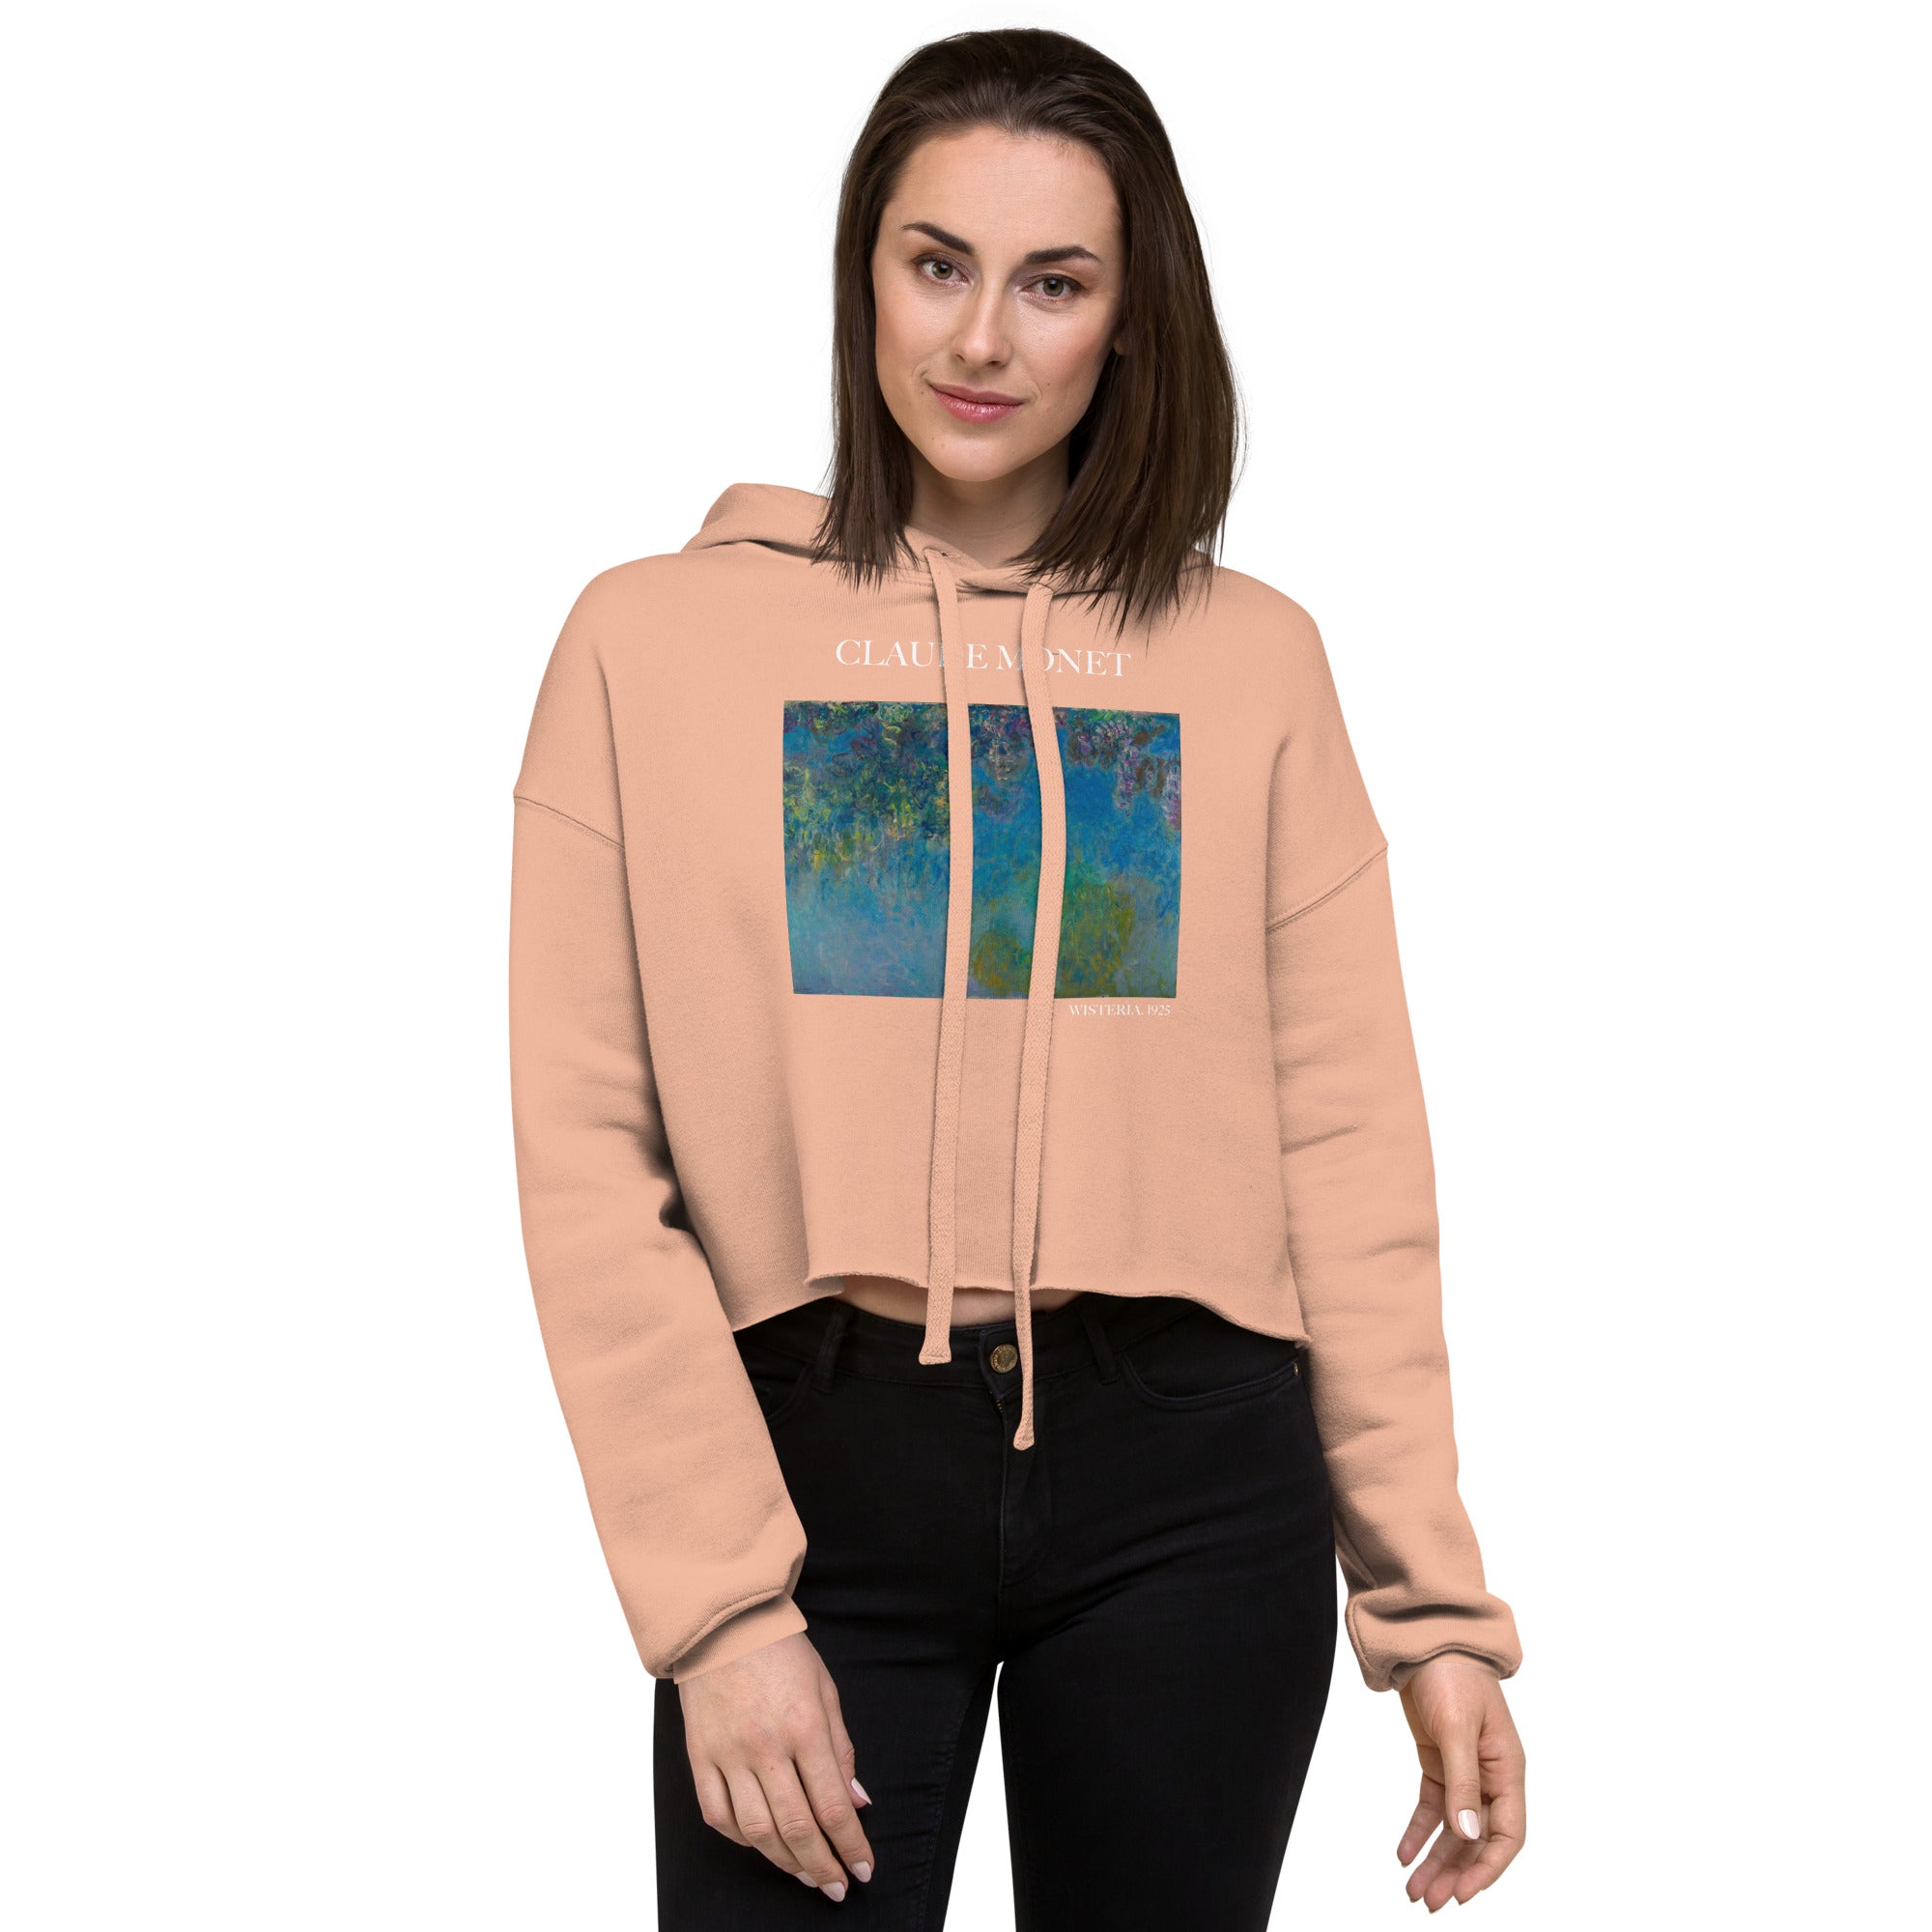 Claude Monet 'Wisteria' Famous Painting Cropped Hoodie | Premium Art Cropped Hoodie